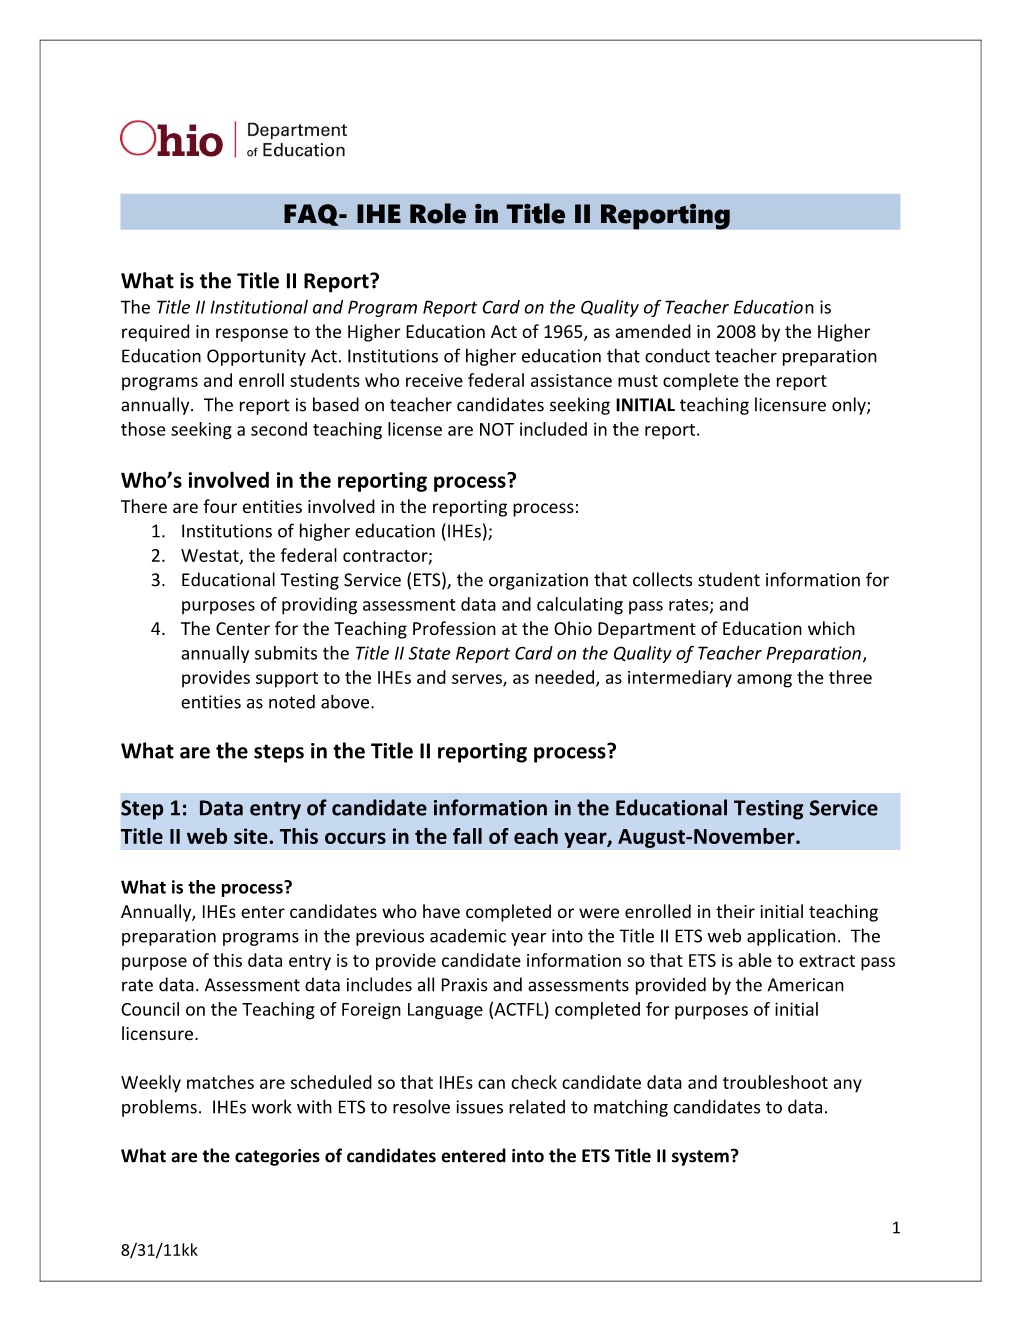 What Is the Title II Report?